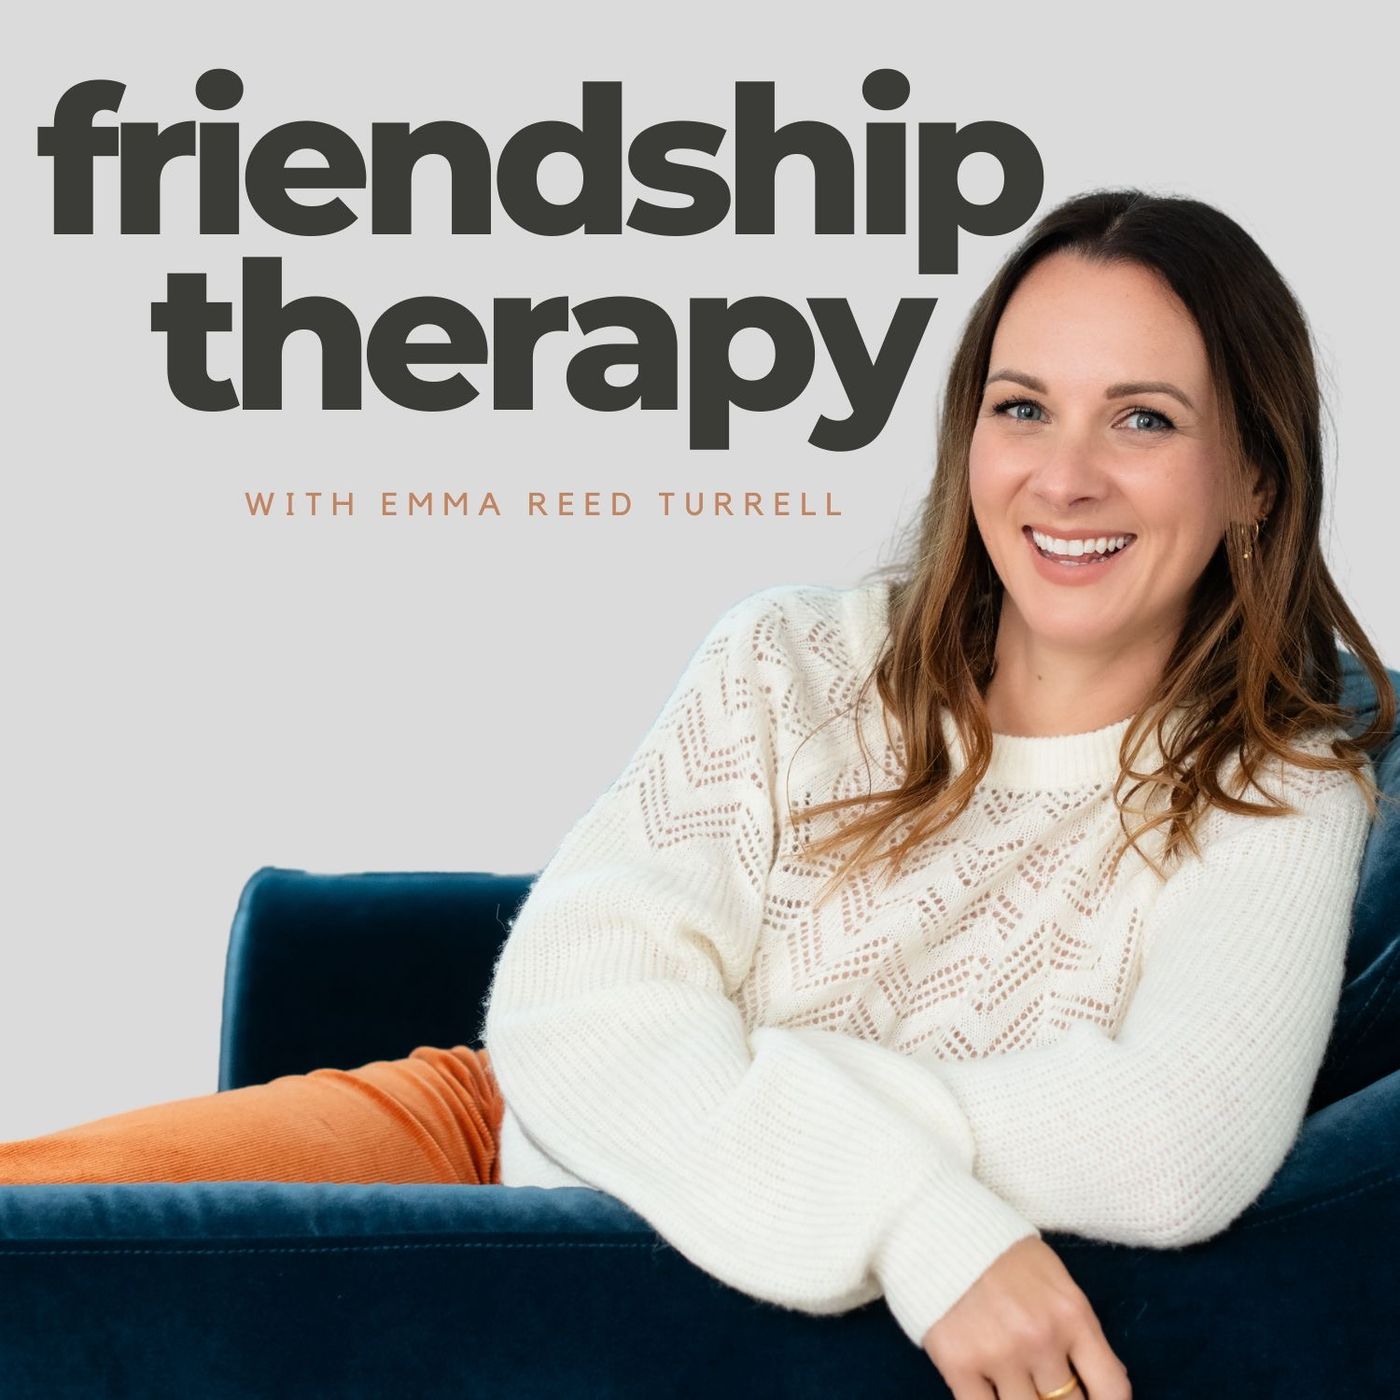 S1, Ep 6 BITESIZE Friendship Therapy: Friendship Reminiscences - are we filling in the wrong blanks?